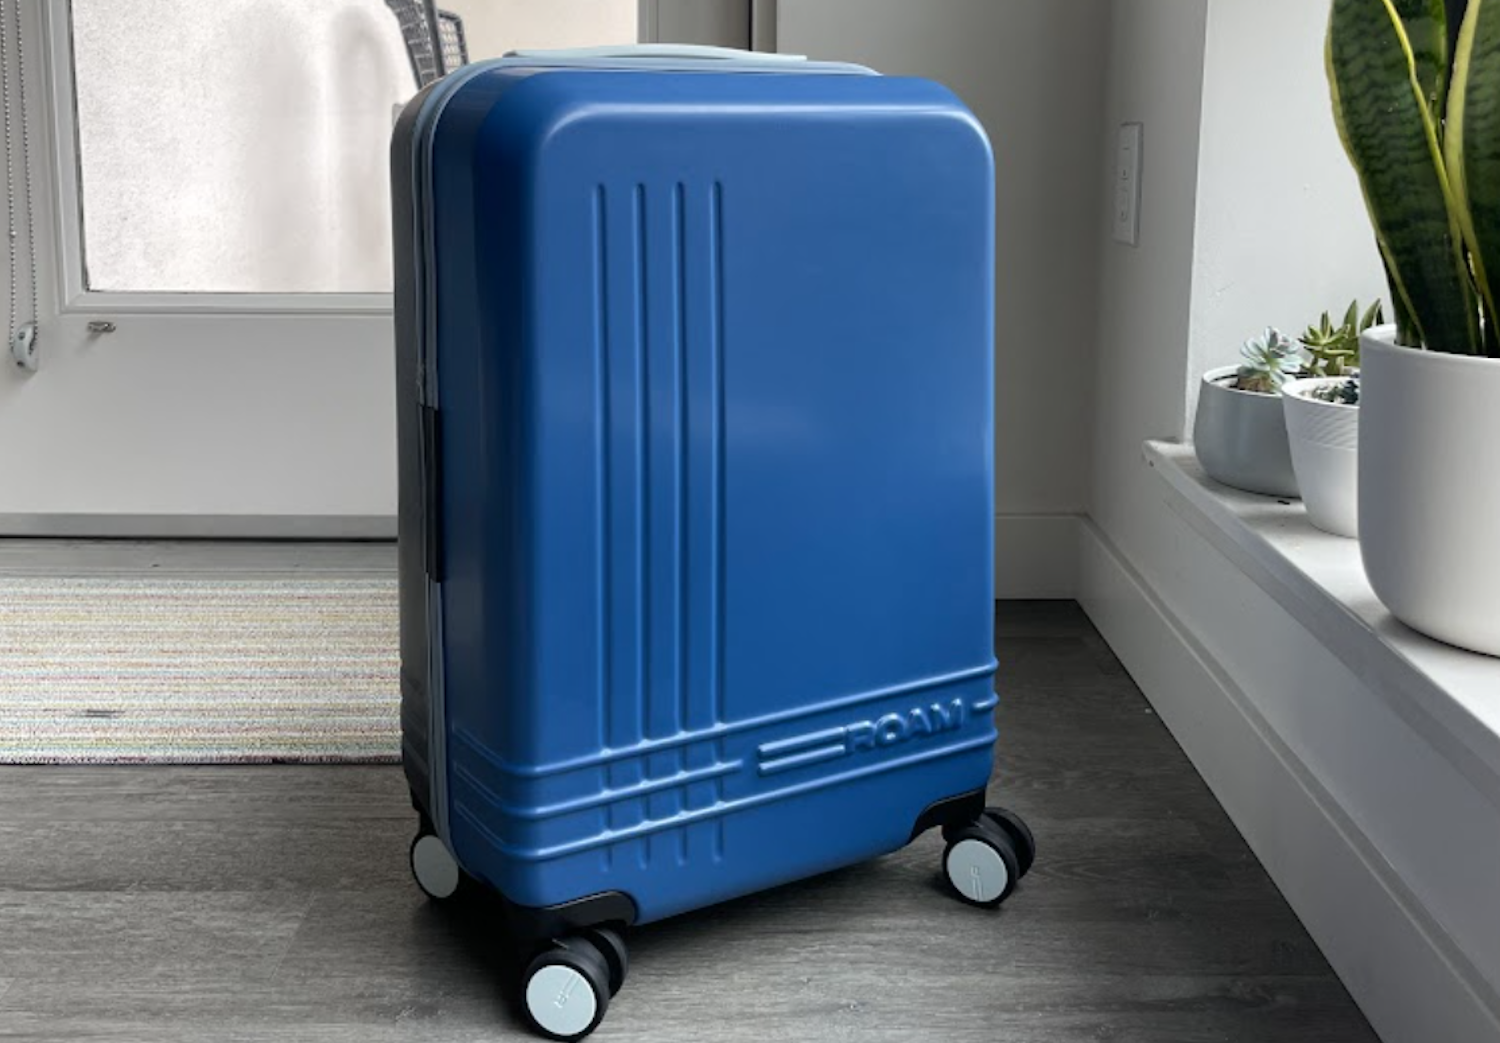 ROAM luggage review: Gorgeous, custom luggage at a steep price